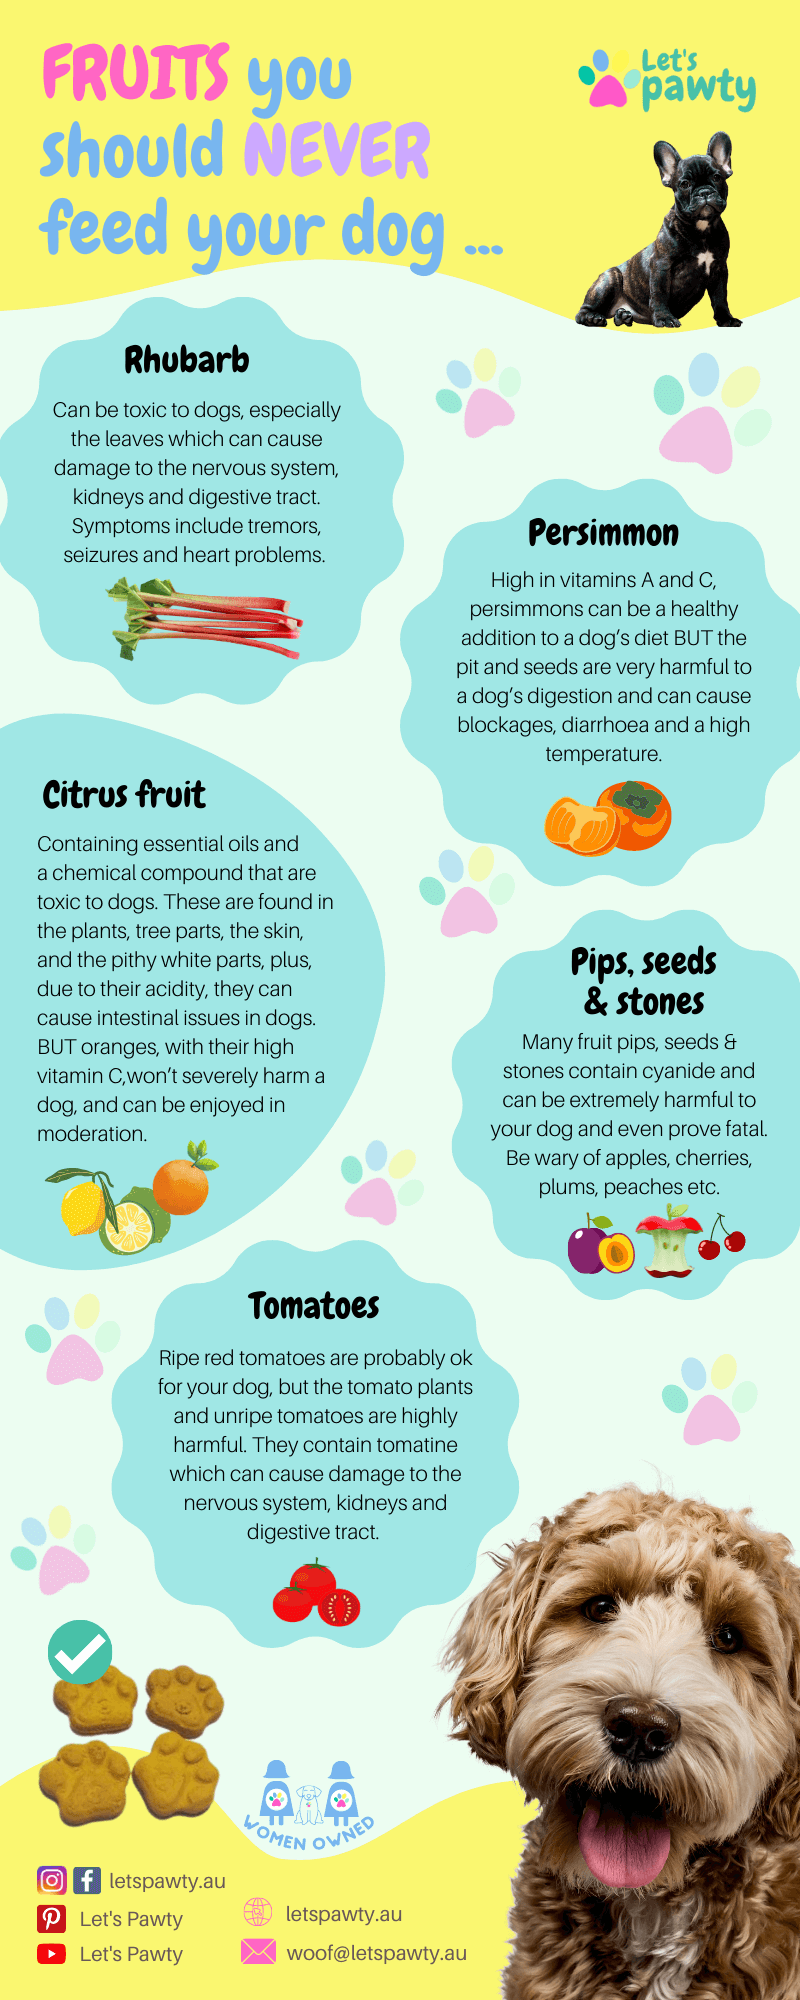 Fruits you should never feed your dog and why by Let's Pawty